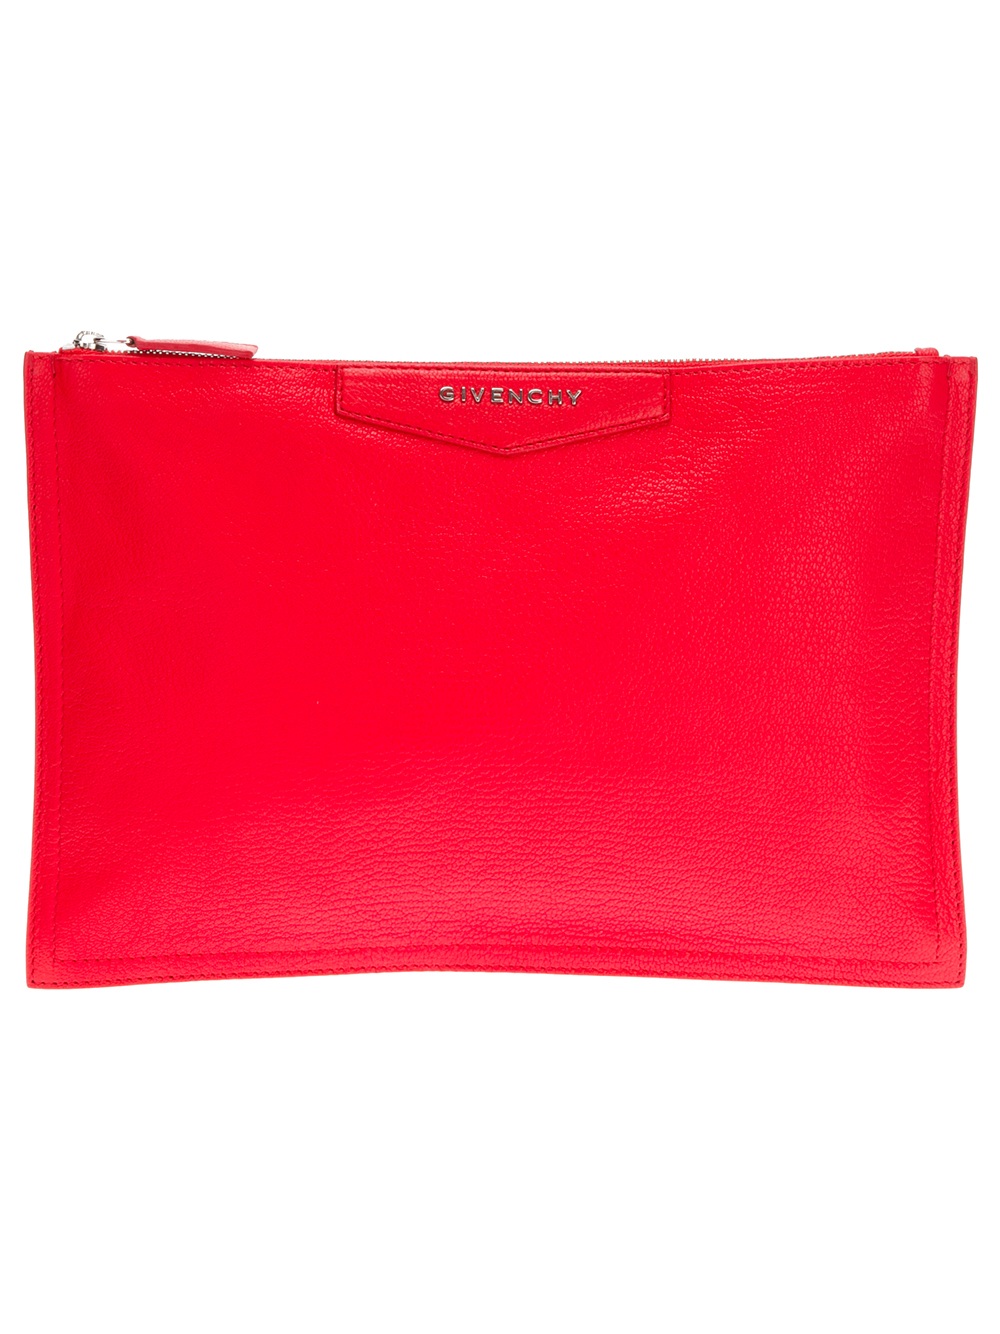 givenchy red clutch